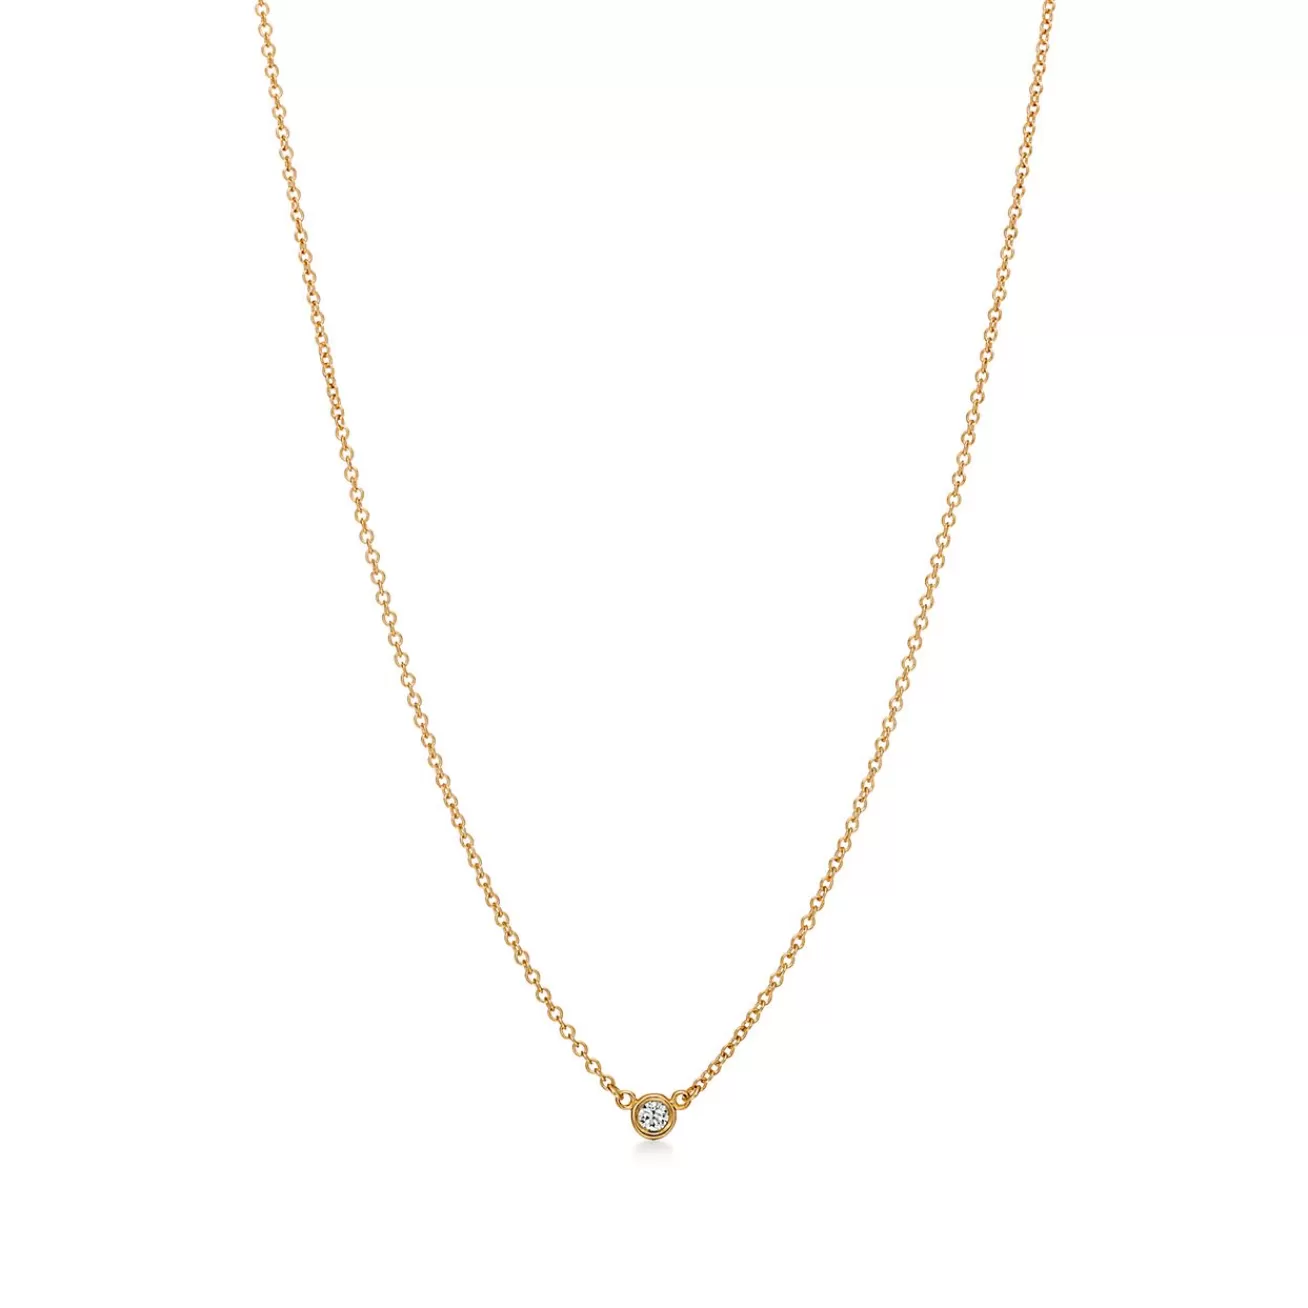 Tiffany & Co. Elsa Peretti® Diamonds by the Yard® pendant in 18k gold with carat weight .05. | ^ Necklaces & Pendants | Gifts for Her